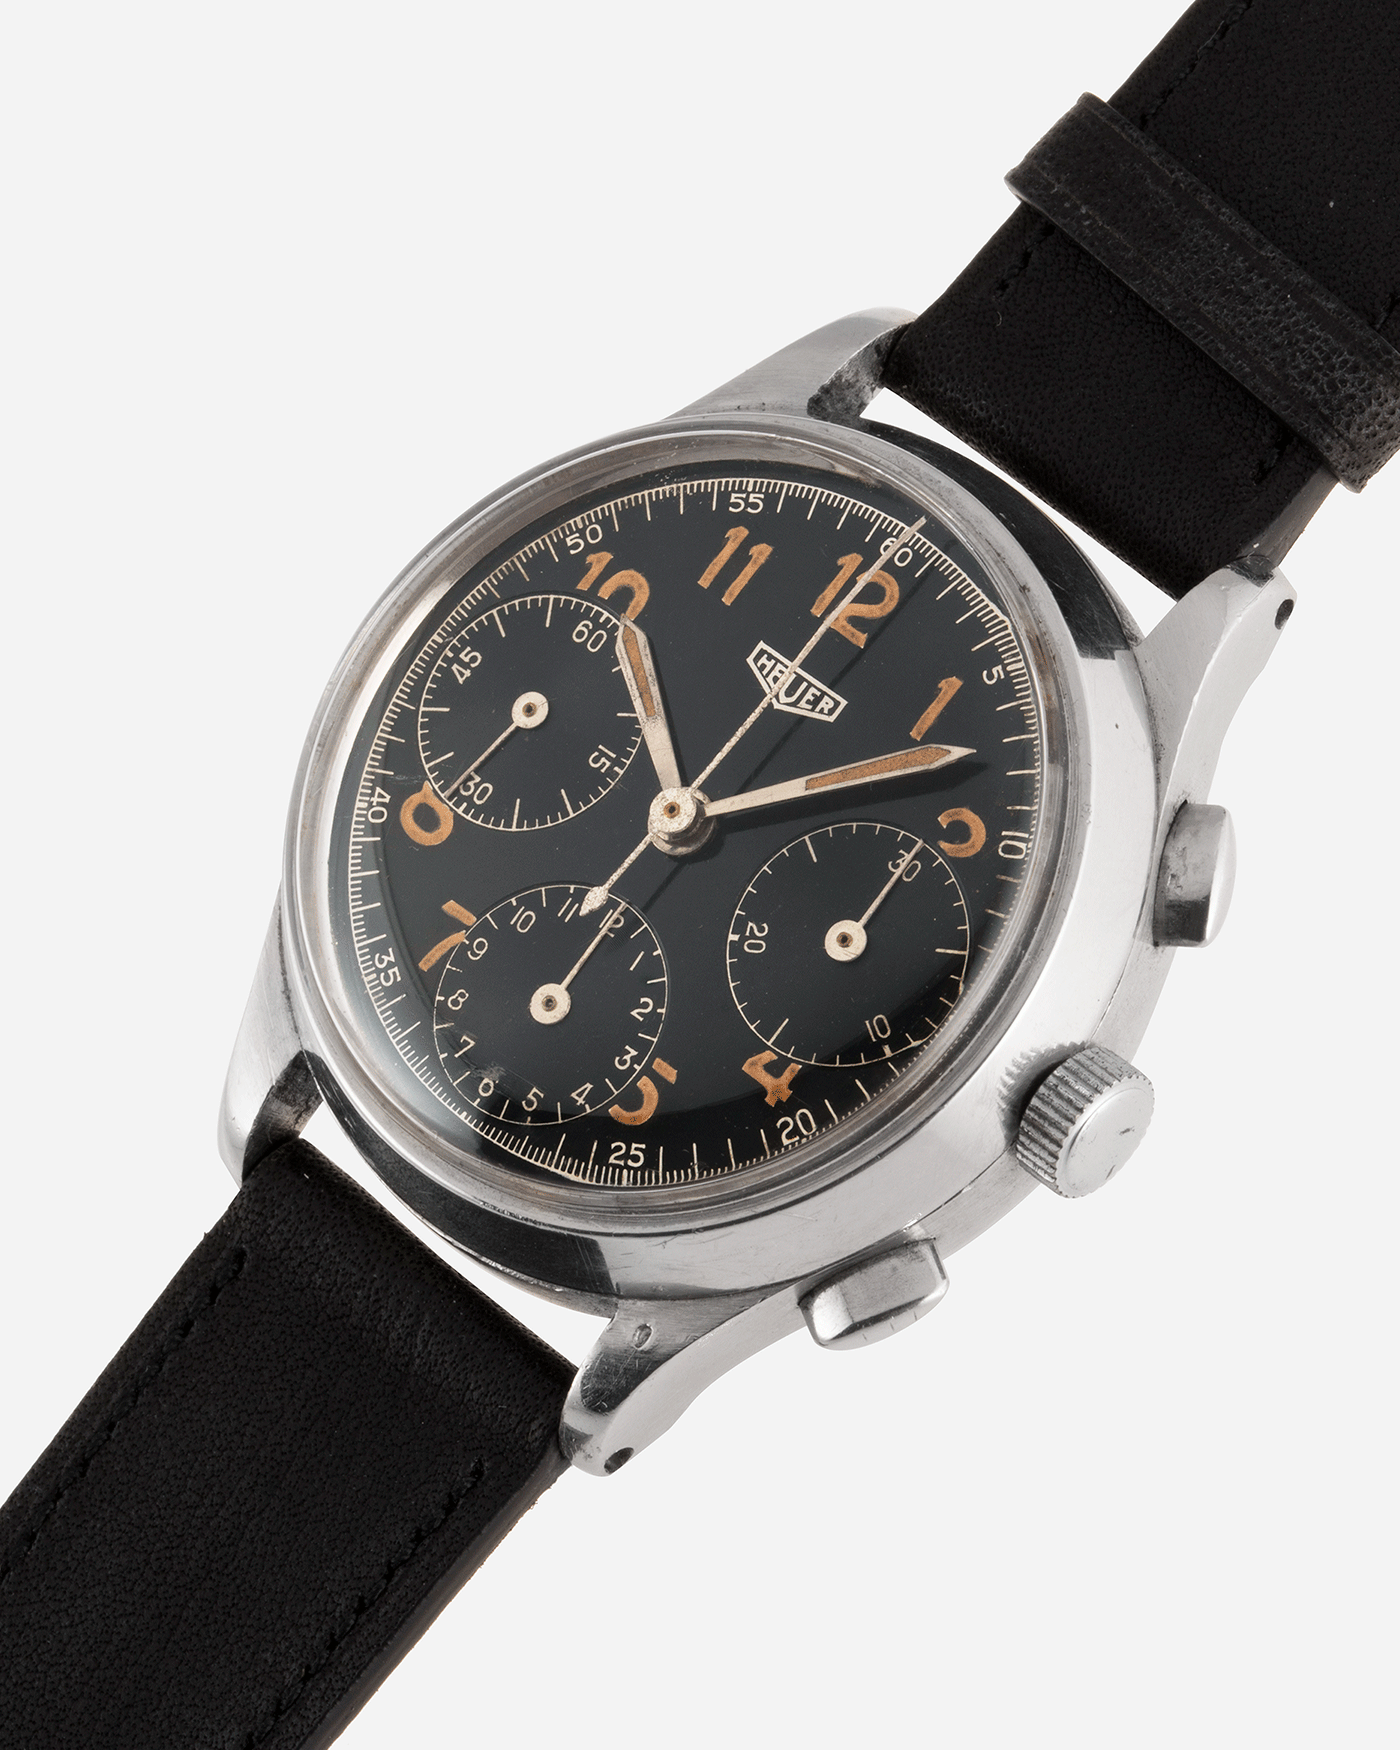 Brand: Heuer Year: 1940’s Reference Number: 345 Material: Stainless Steel Movement: Valjoux 71 Case Diameter: 36mm Lug Width: 18mm Bracelet/Strap: Nostime Black Calf